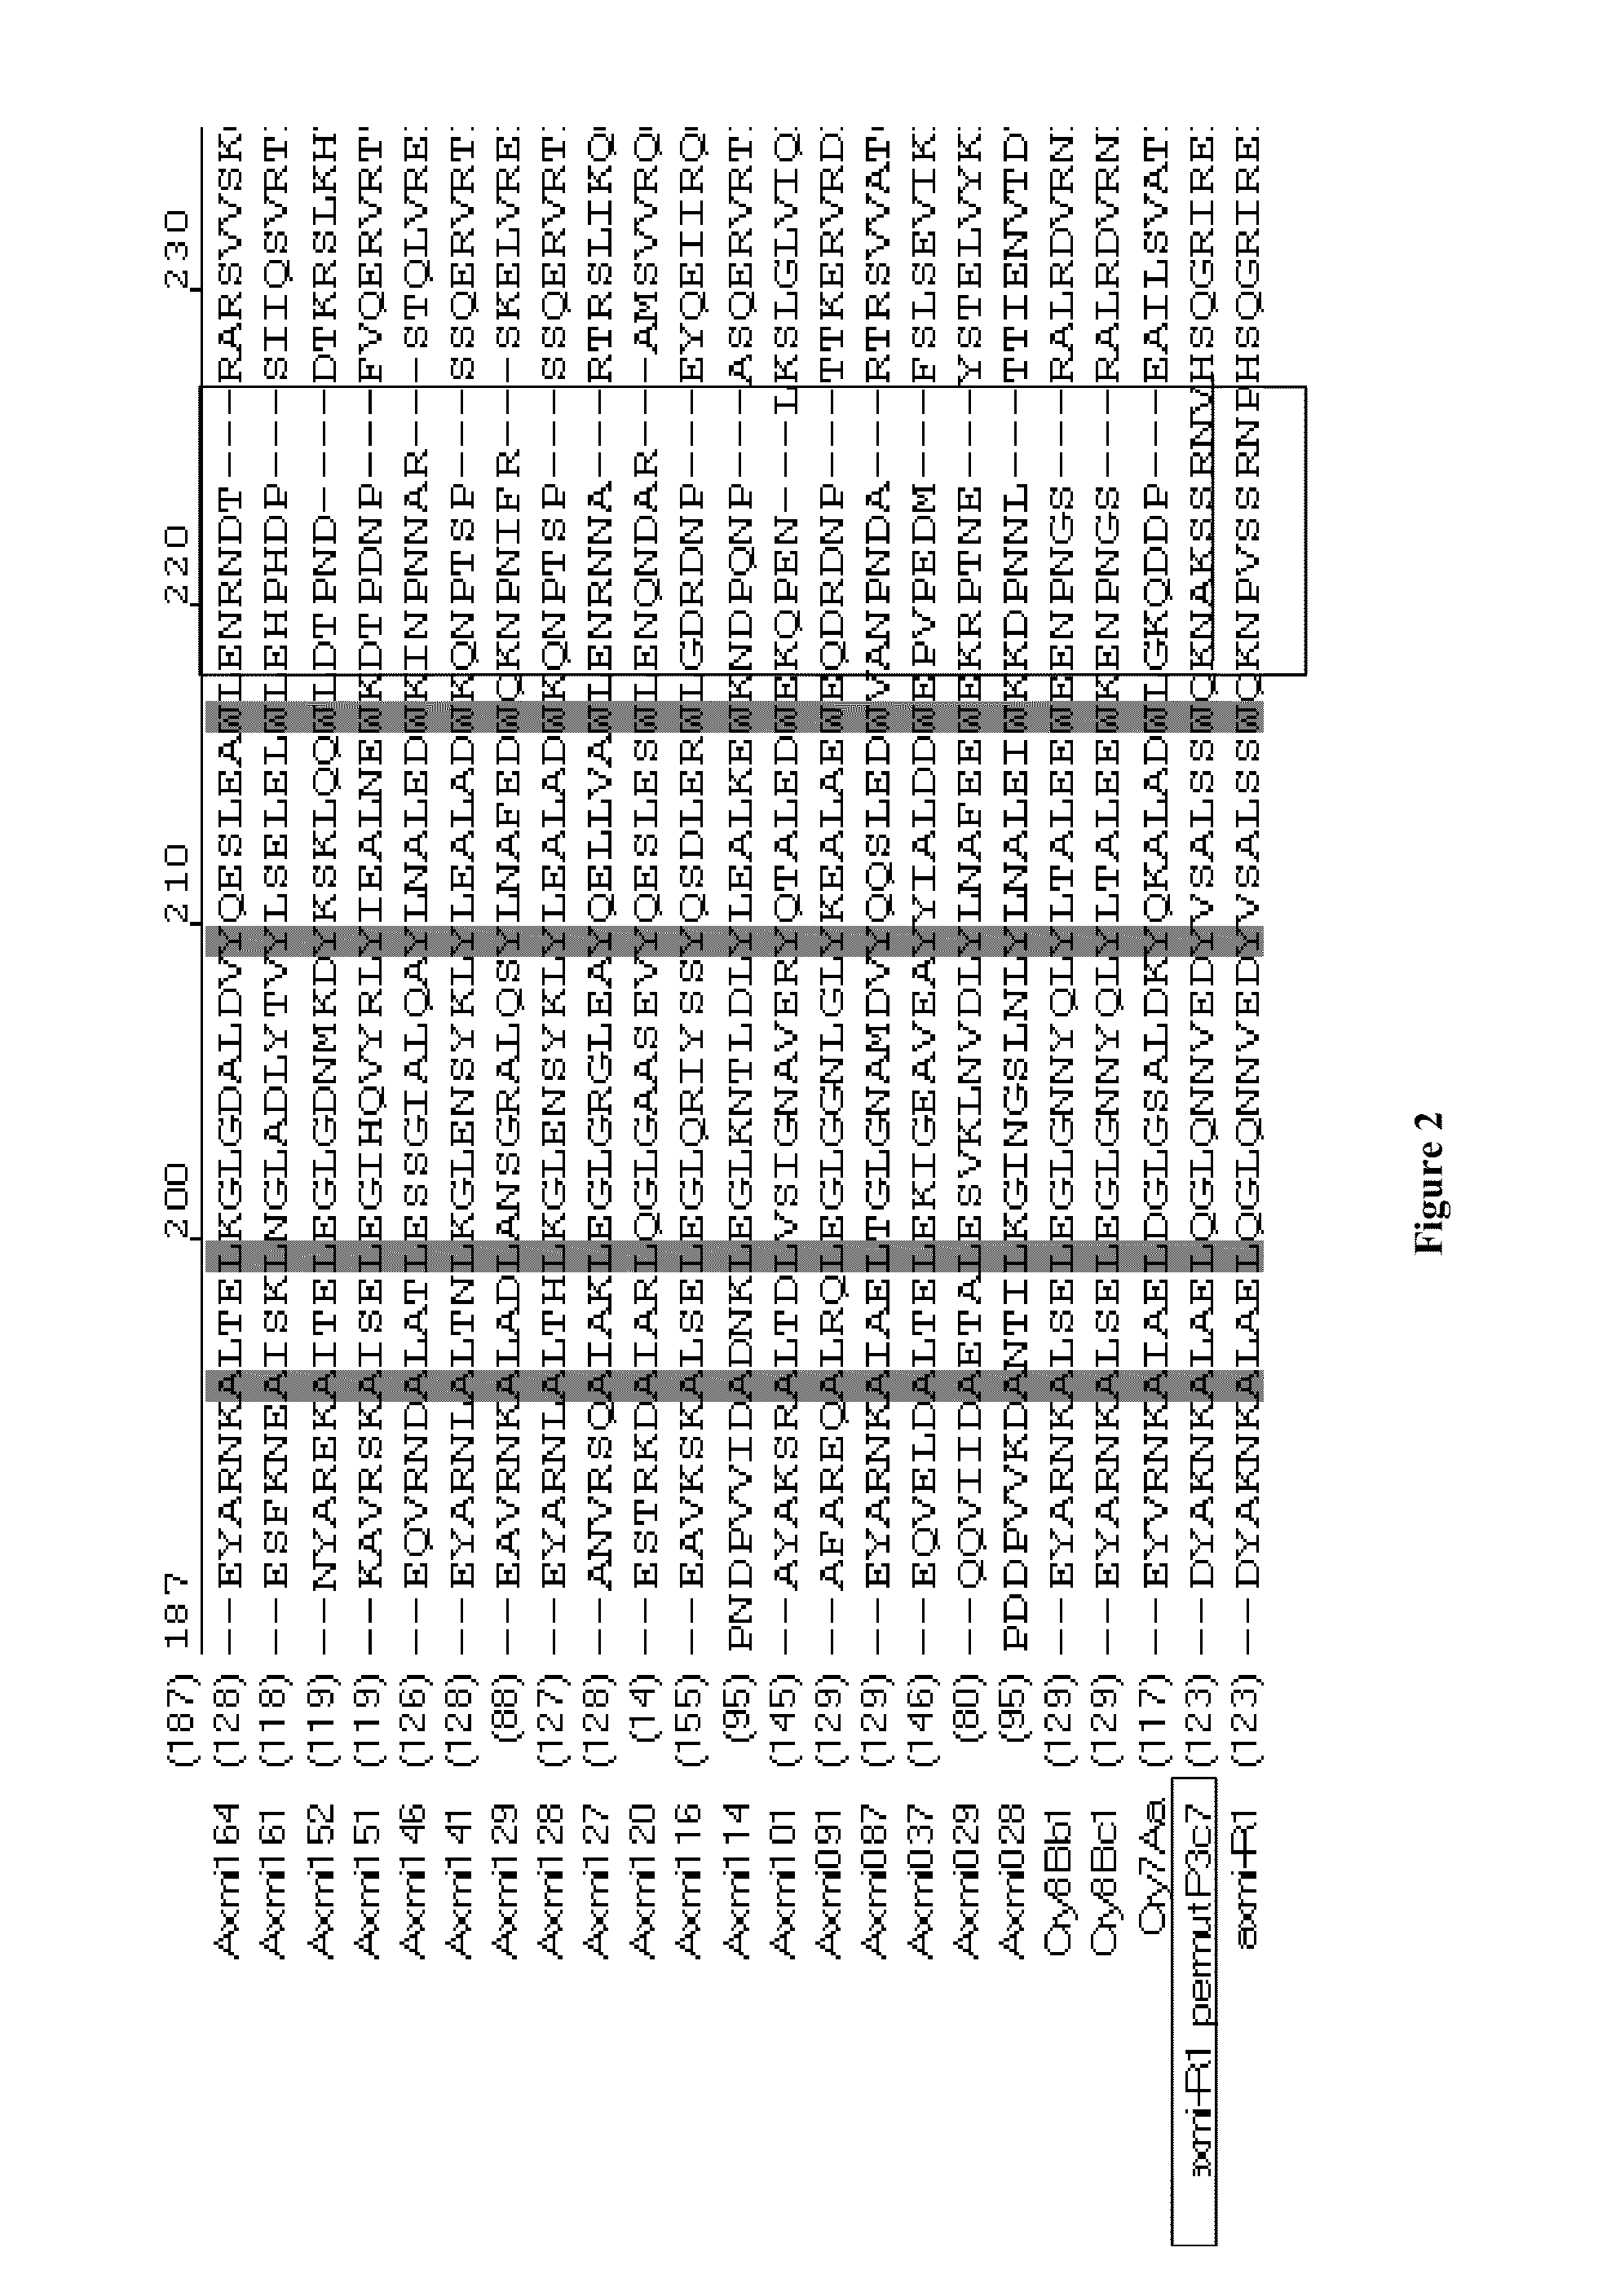 Variant axmi-r1 delta endotoxin genes and methods for their use